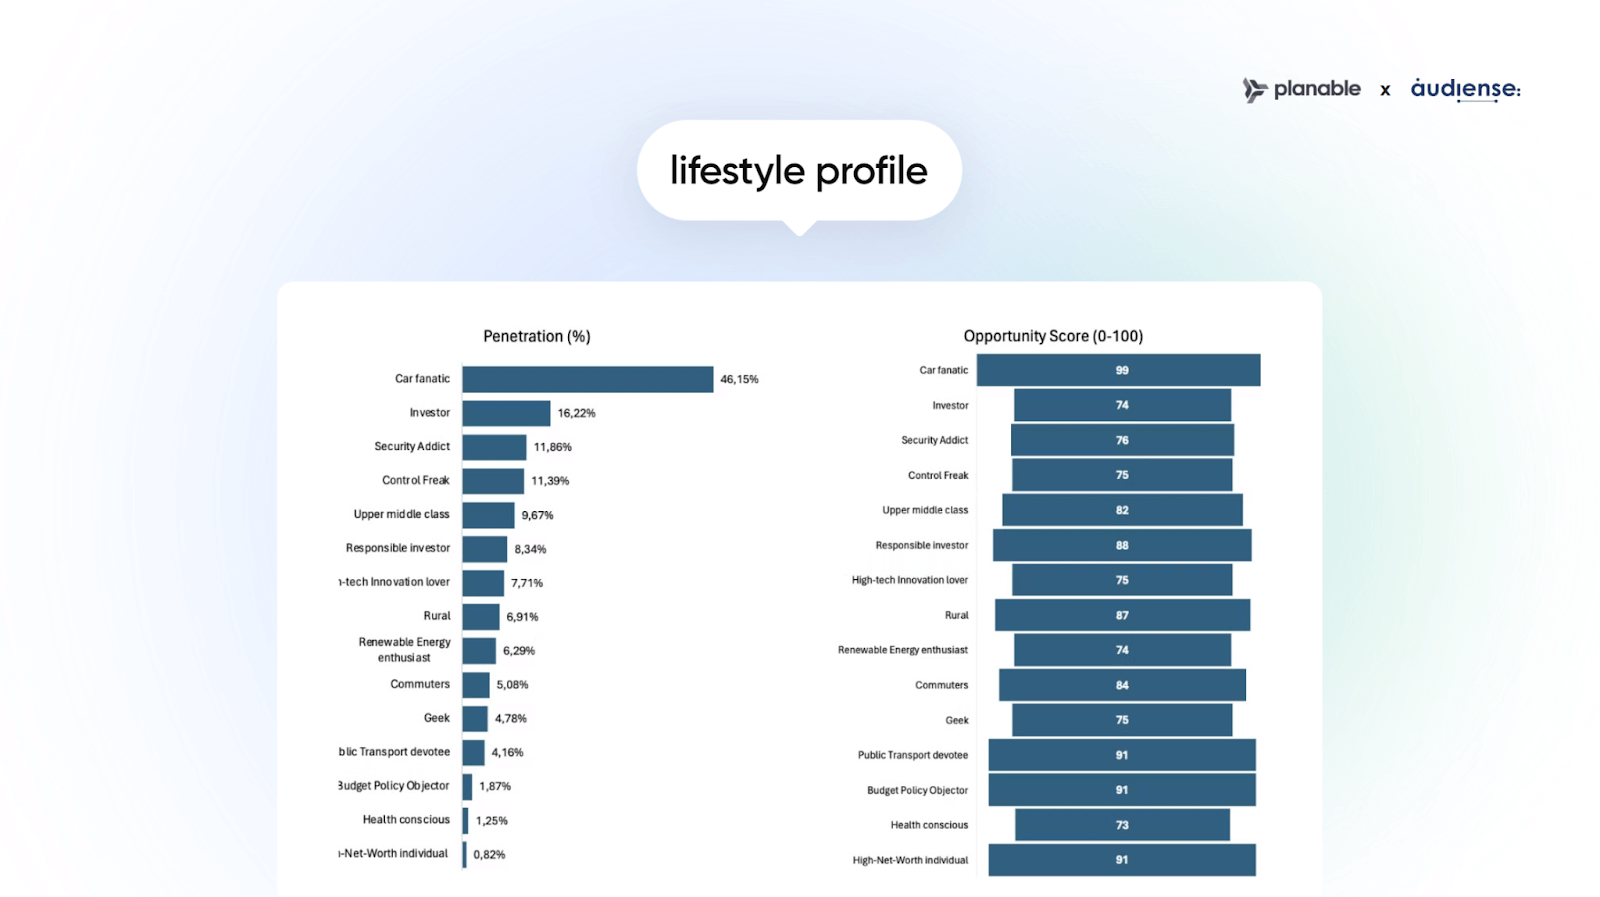 Lifestyle profile chart showing penetration percentages and opportunity scores for various segments including car fanatic, investor, and security addict.